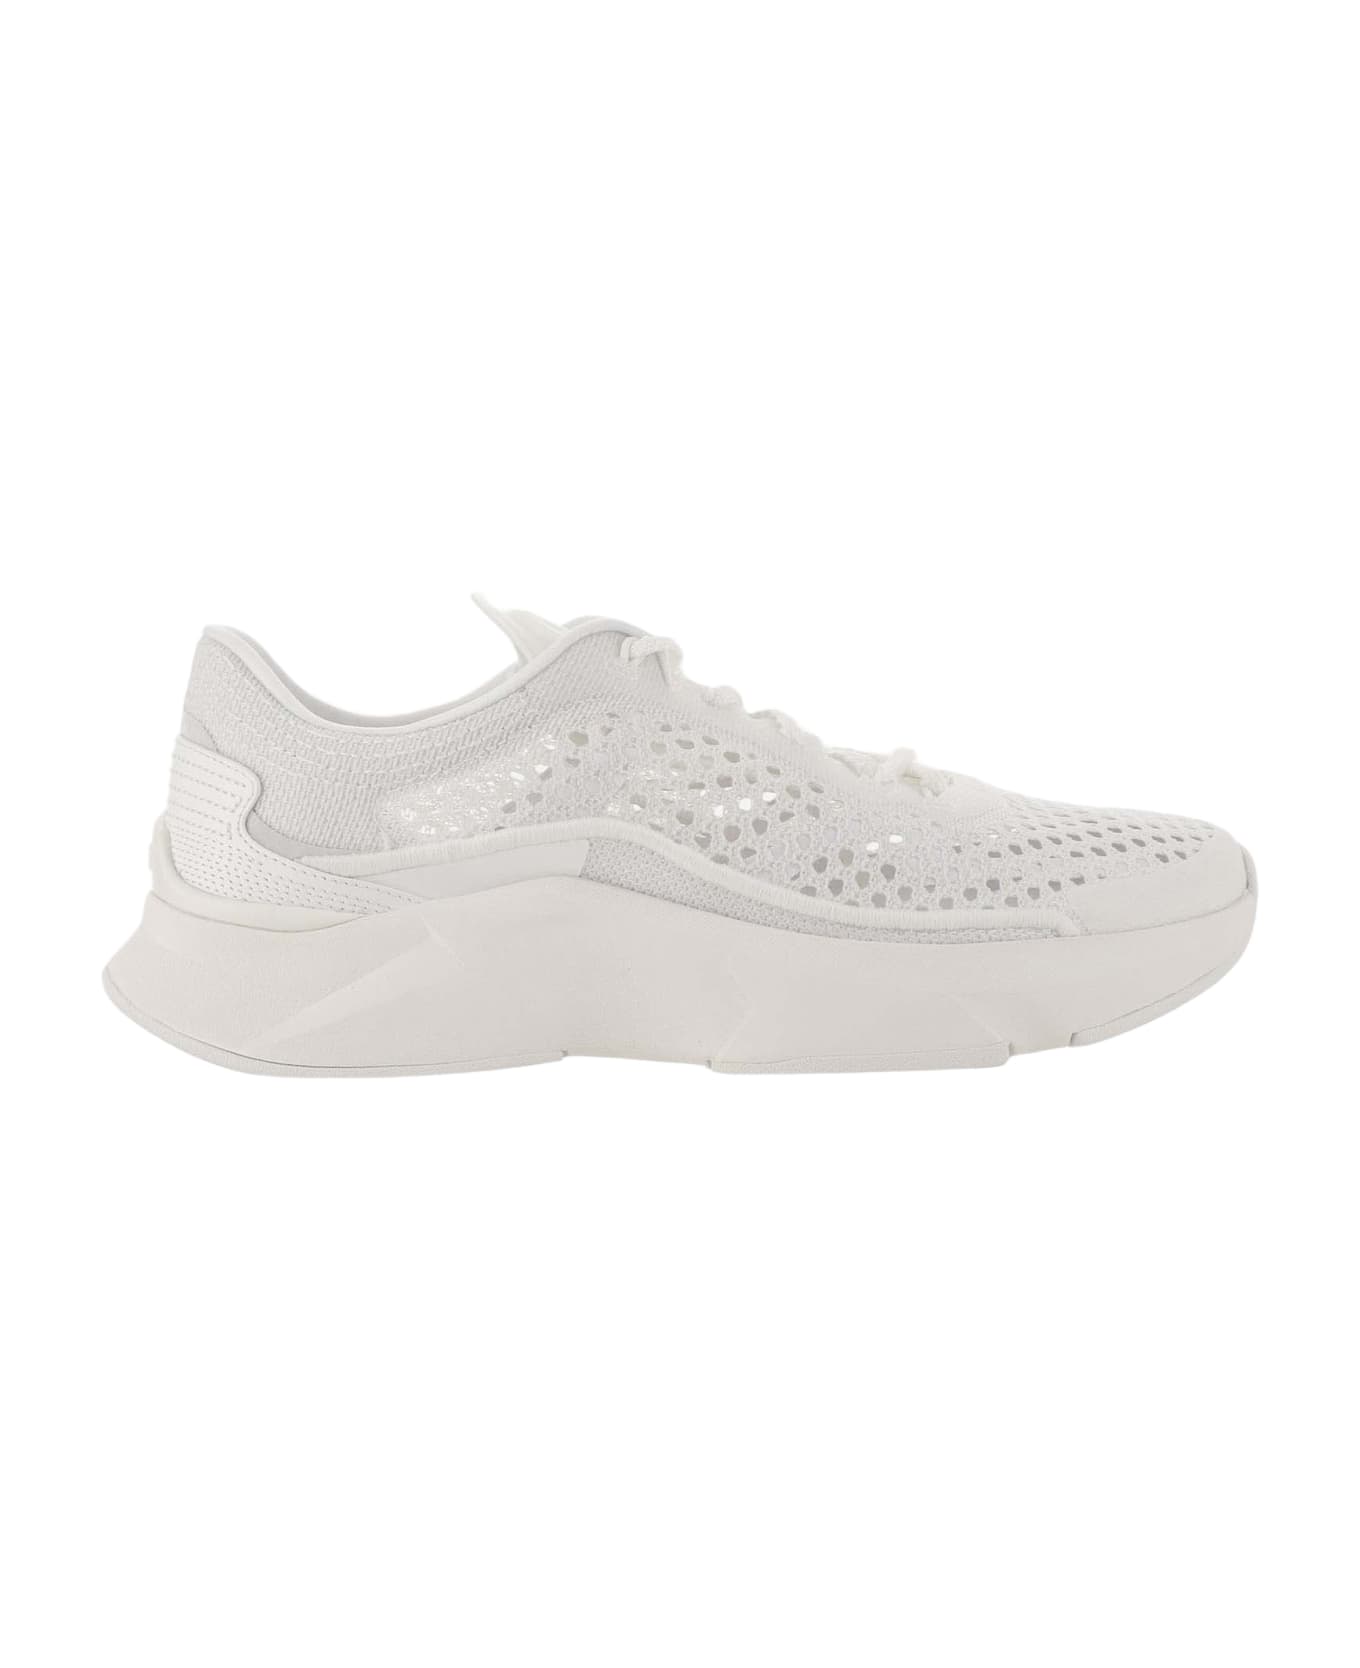 Valentino Garavani True Actress Sneakers In Mesh And Leather - White